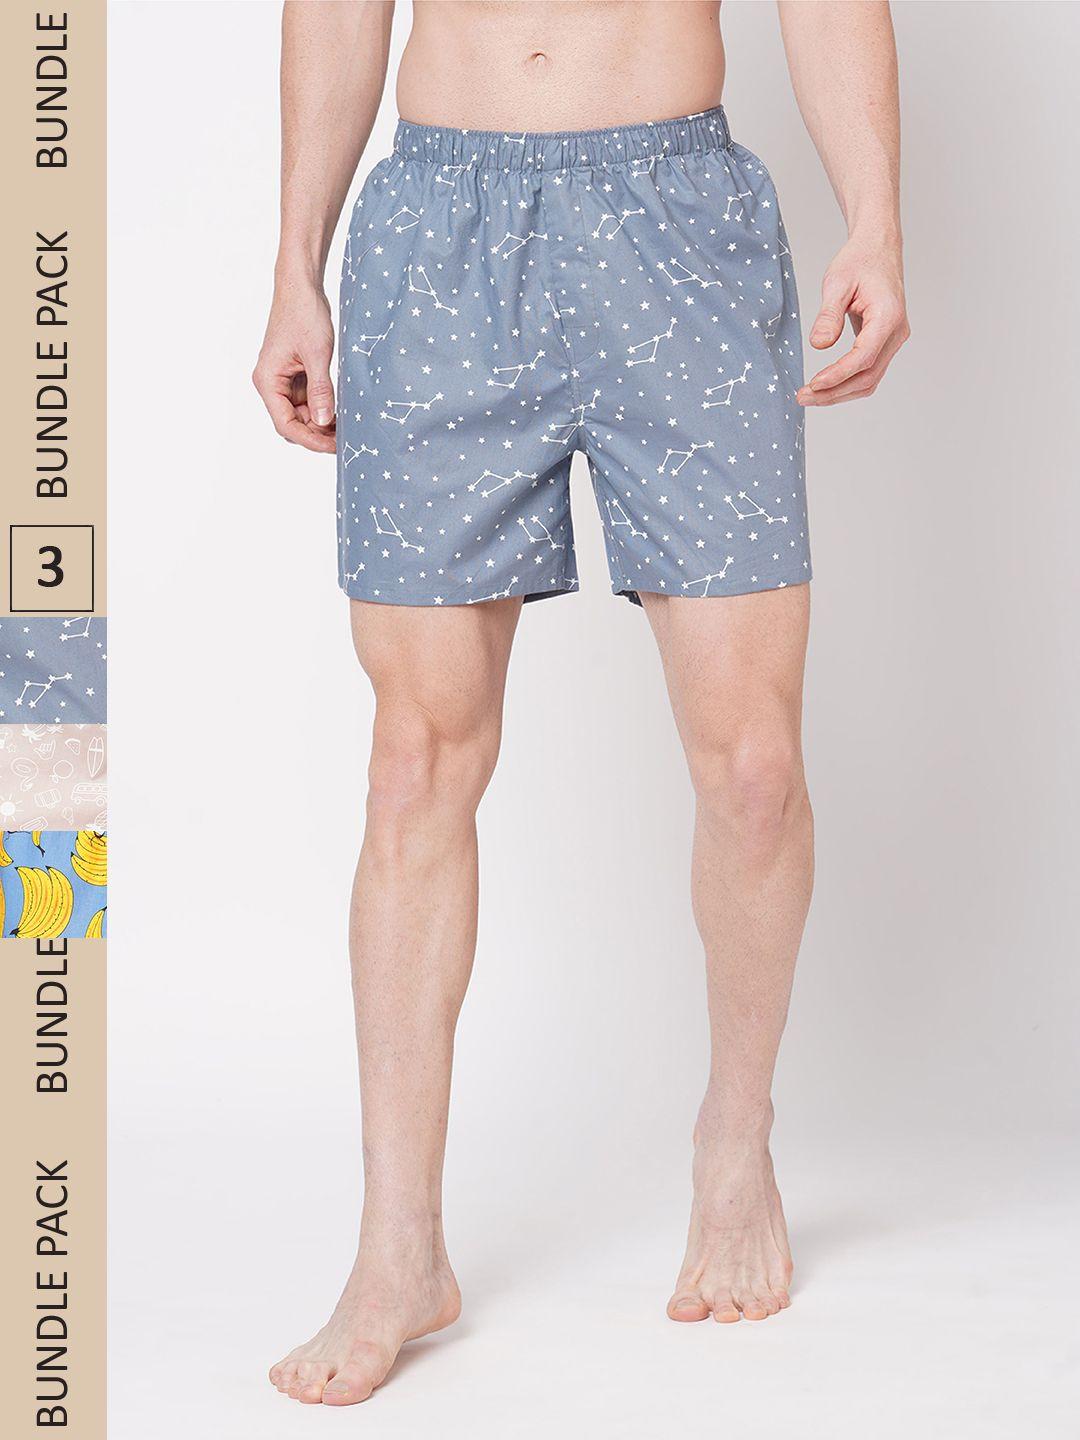 fitz-men-pack-of-3-printed-pure-cotton-boxers--aw22-so-65nygygrol-1794-l